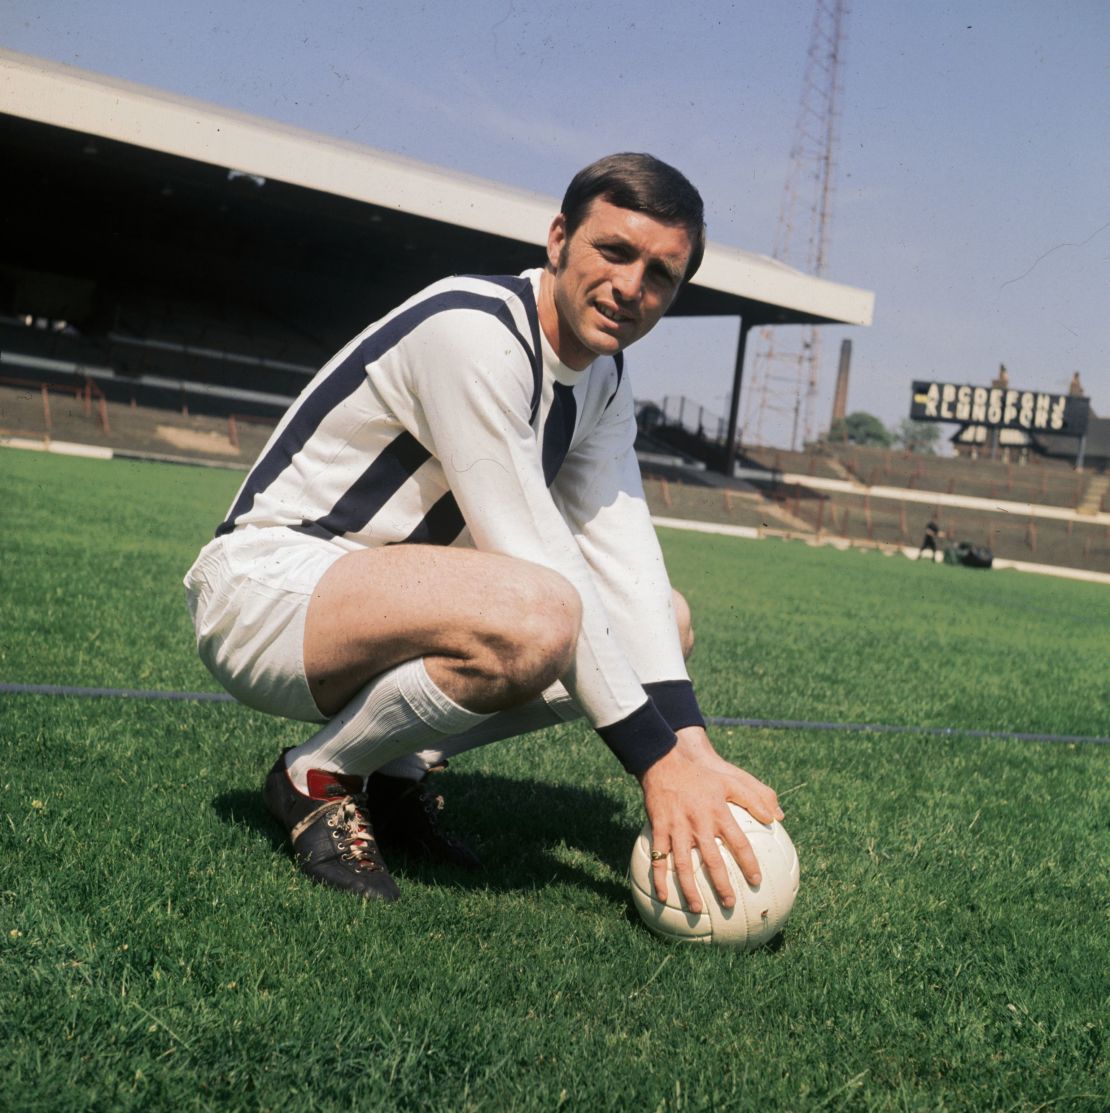 Astle scored 174 goals for West Brom.